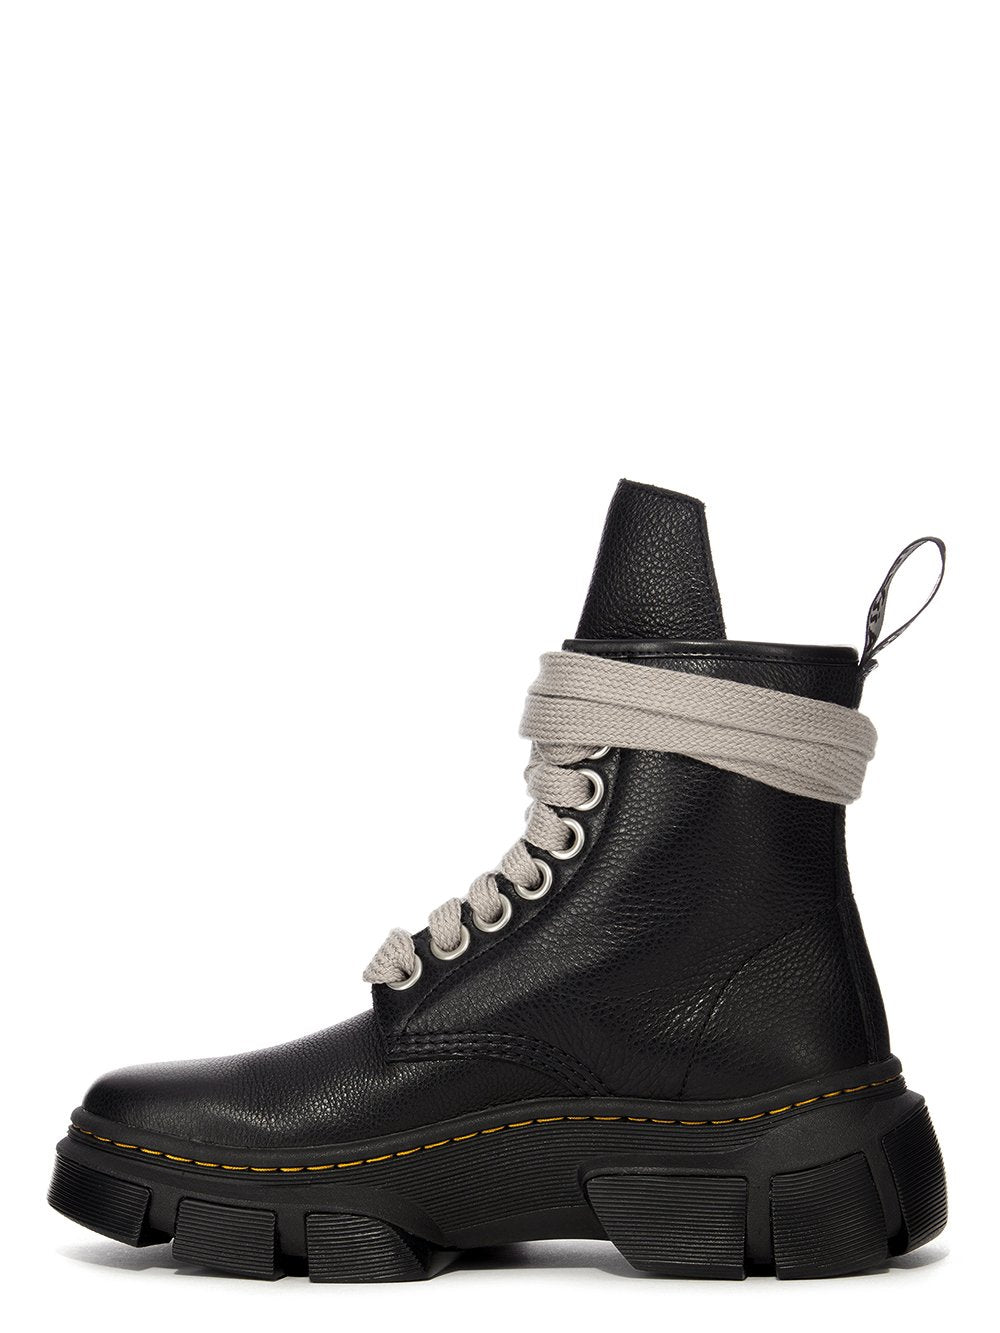 Dr. Martens x Rick Owens 1460 DMXL Jumbo Lace Boot in Black Cow Leather